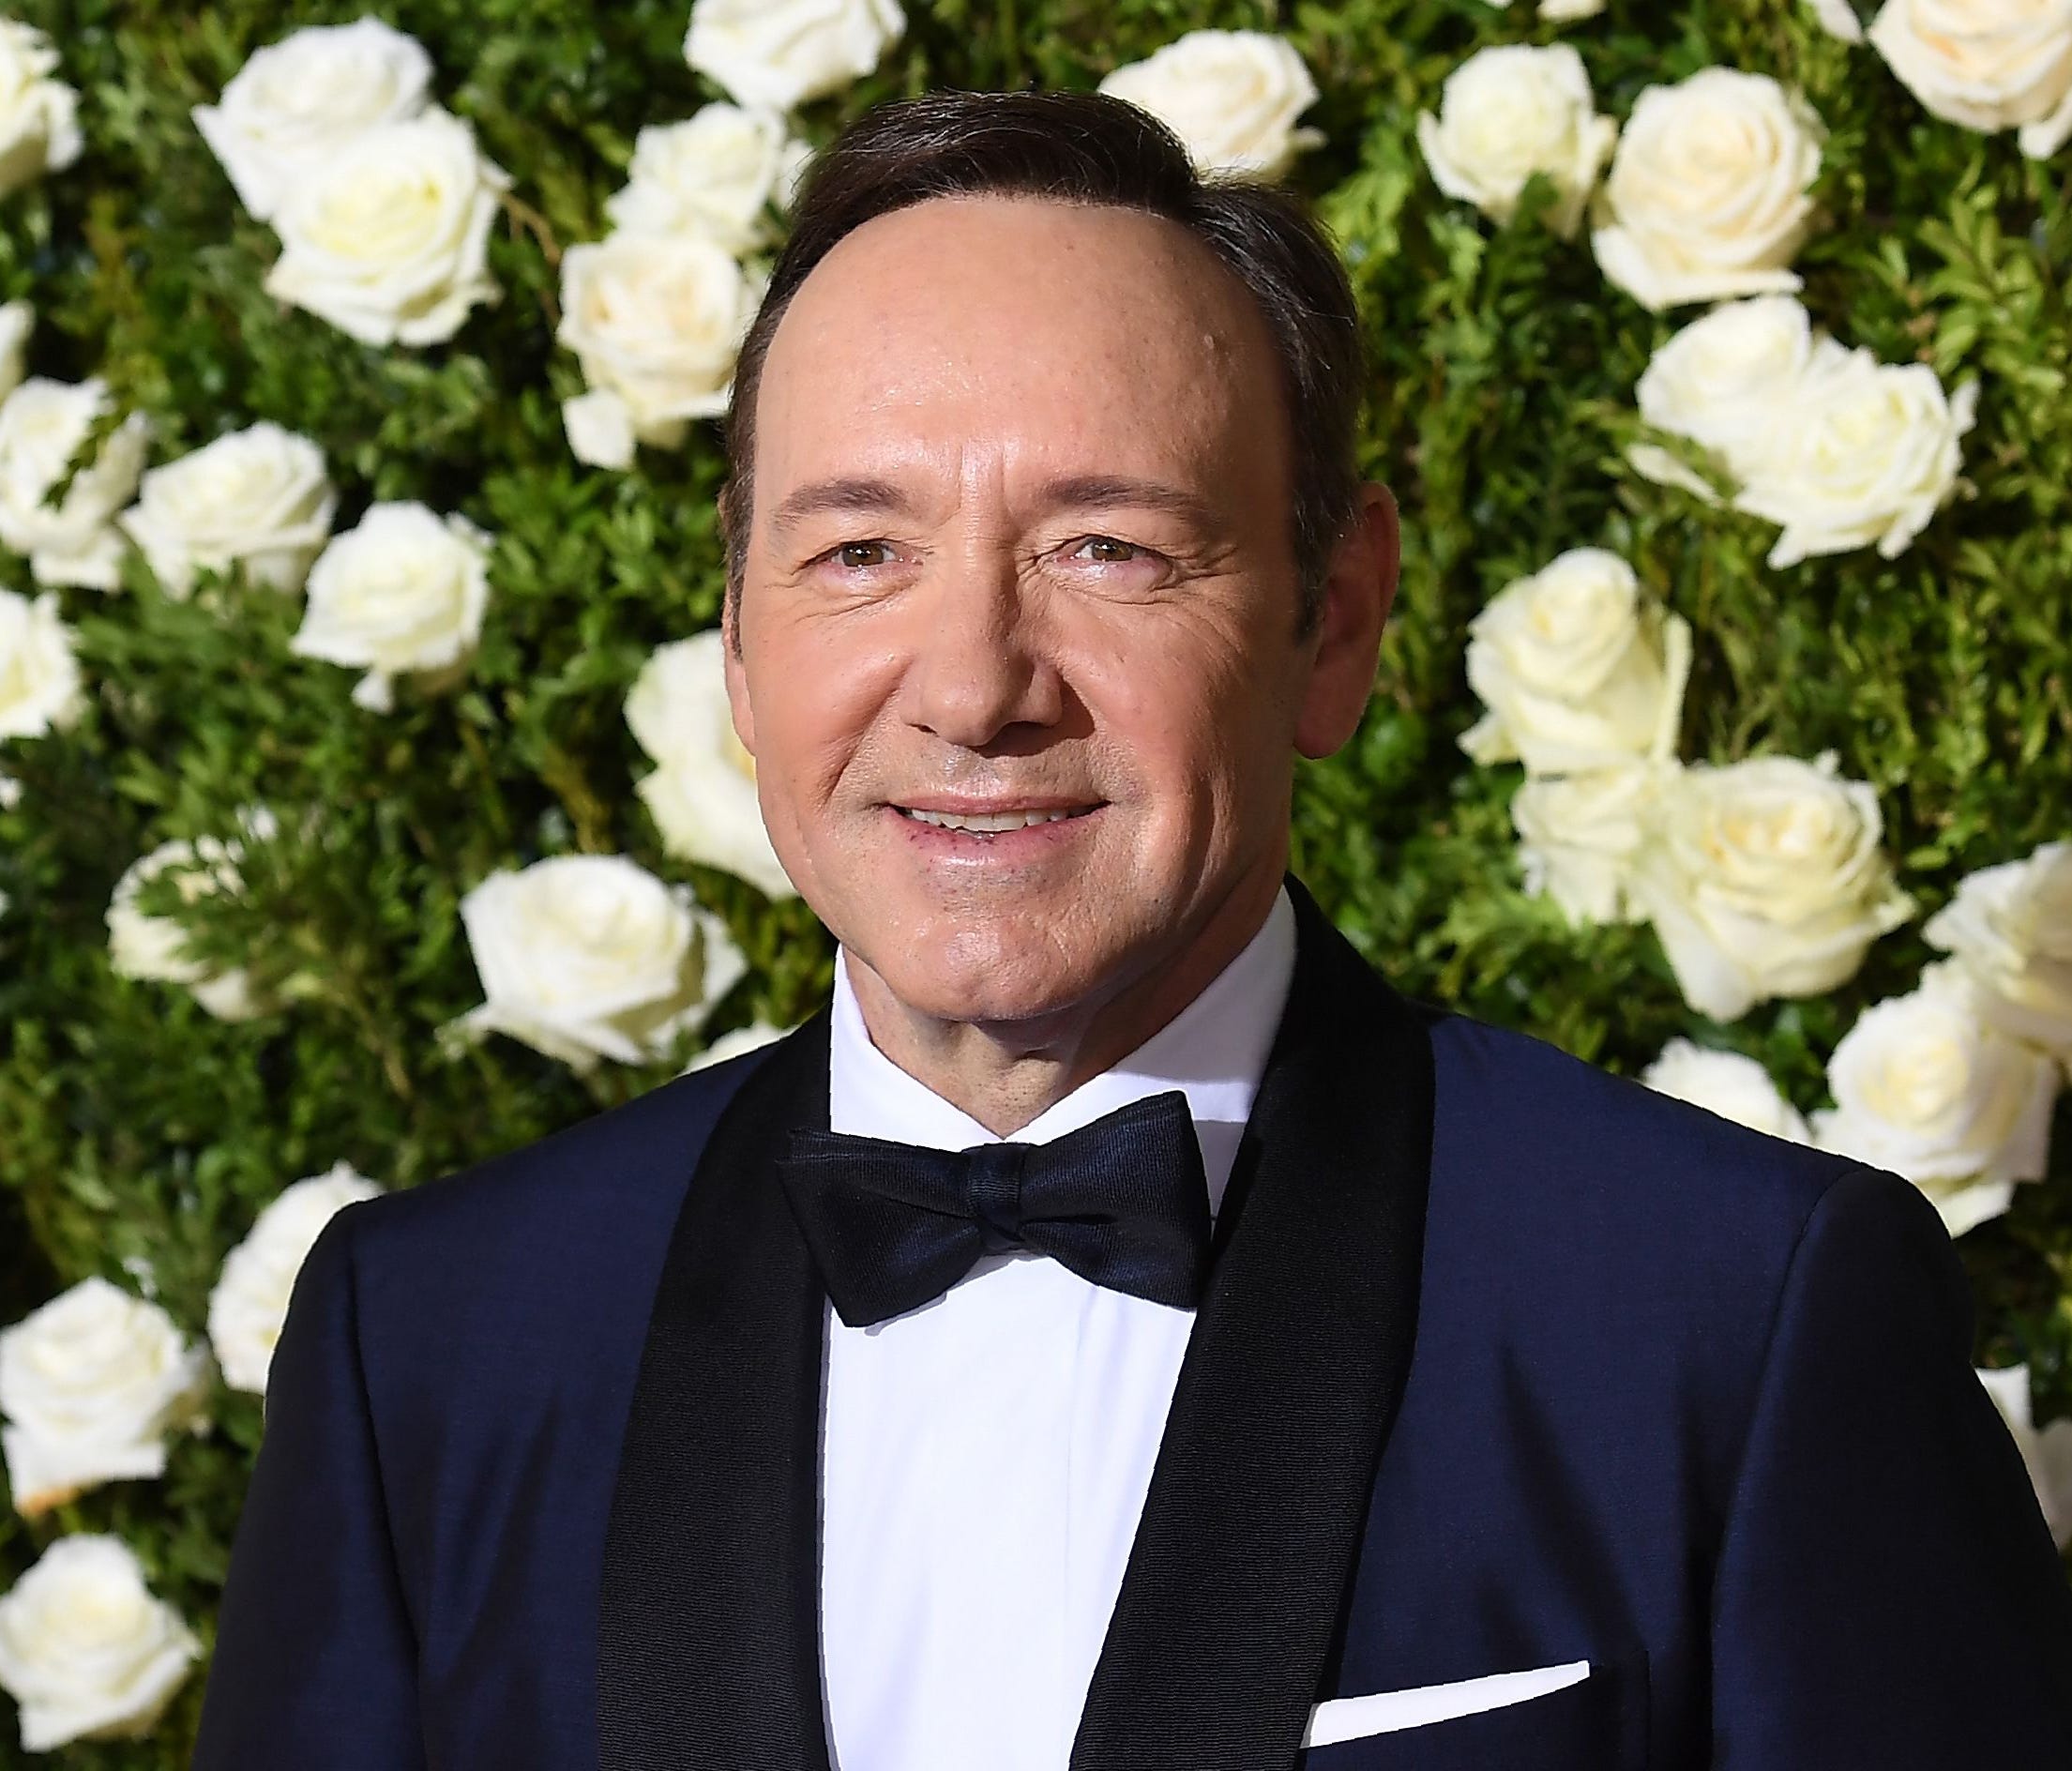 Kevin Spacey, pictured in June, faces new allegations of making advances on a teen.